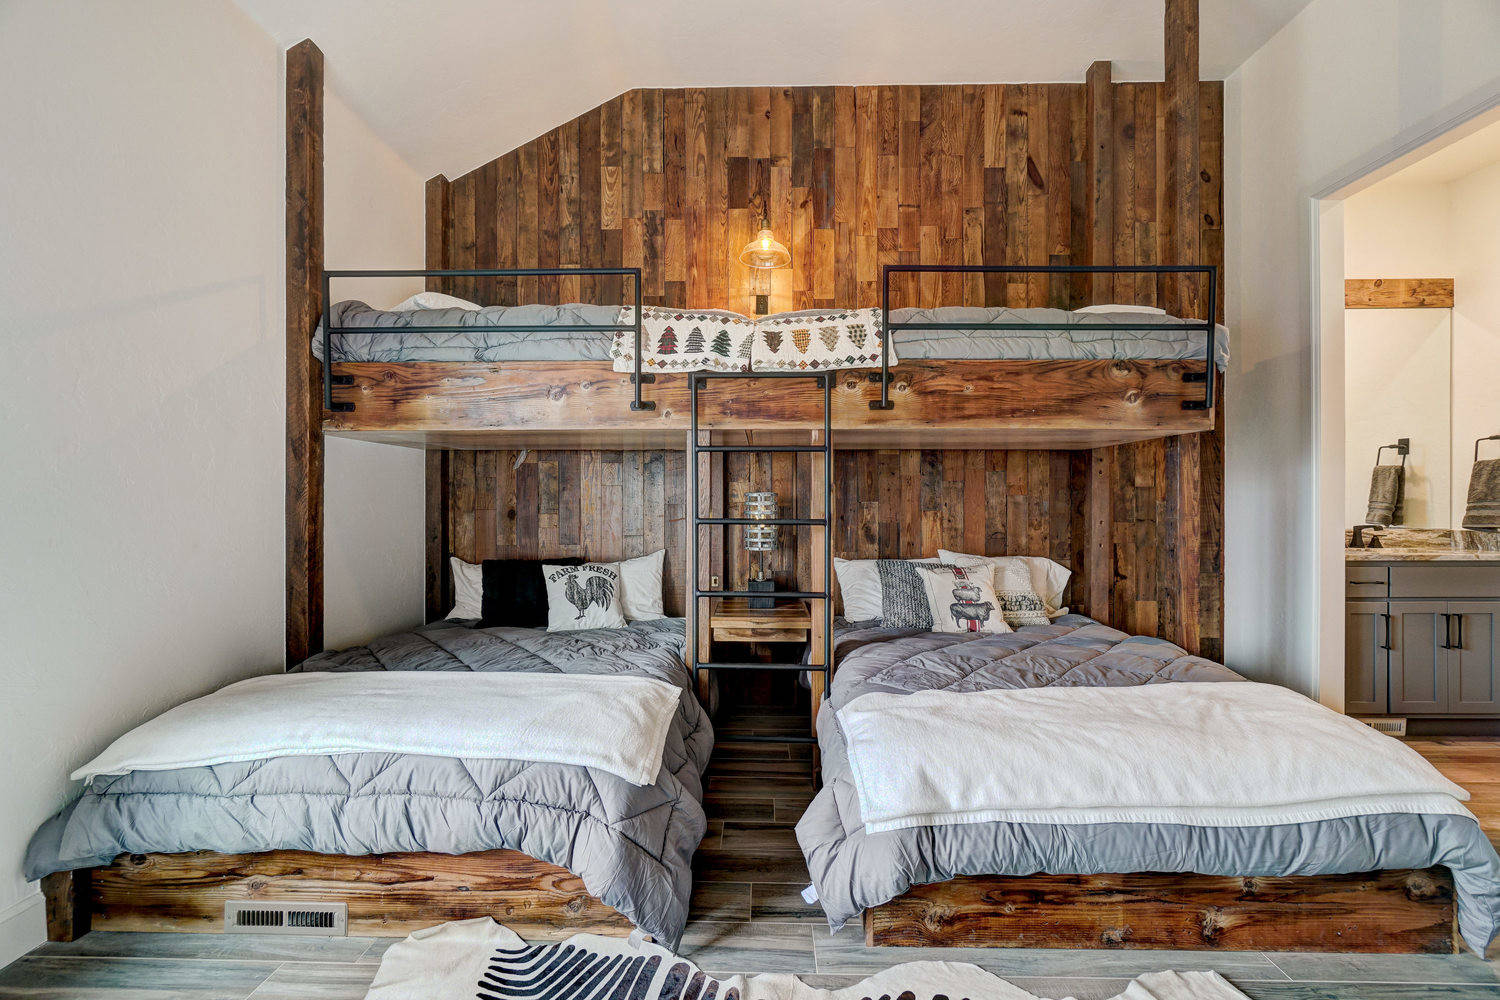 hunting themed bedroom - Google Search  Hunting themed bedroom, Hunting  decor bedroom, Hunting themes